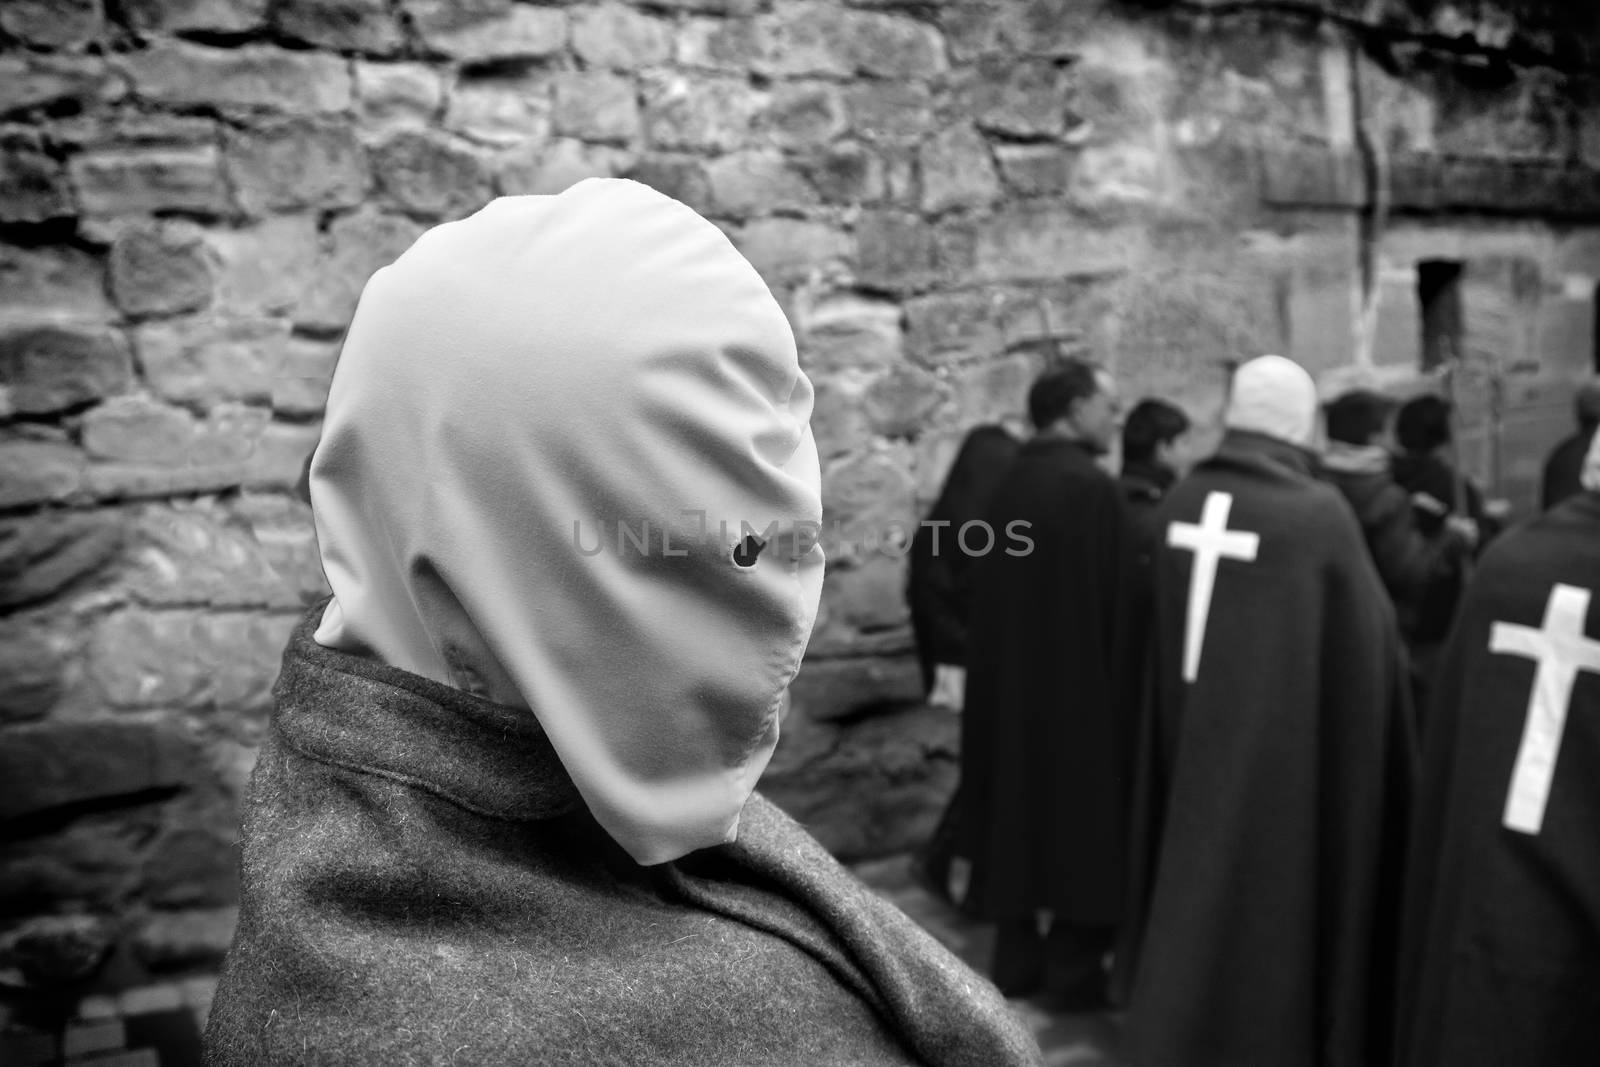 SAN VICENTE DE LA SONSIERRA, SPAIN - GOOD FRIDAY FRIDAY APRIL 6: Man does penance through self-flagellation during Easter holy procession on April 6, 2012, San Vicente de la Sonsierra, Spain.